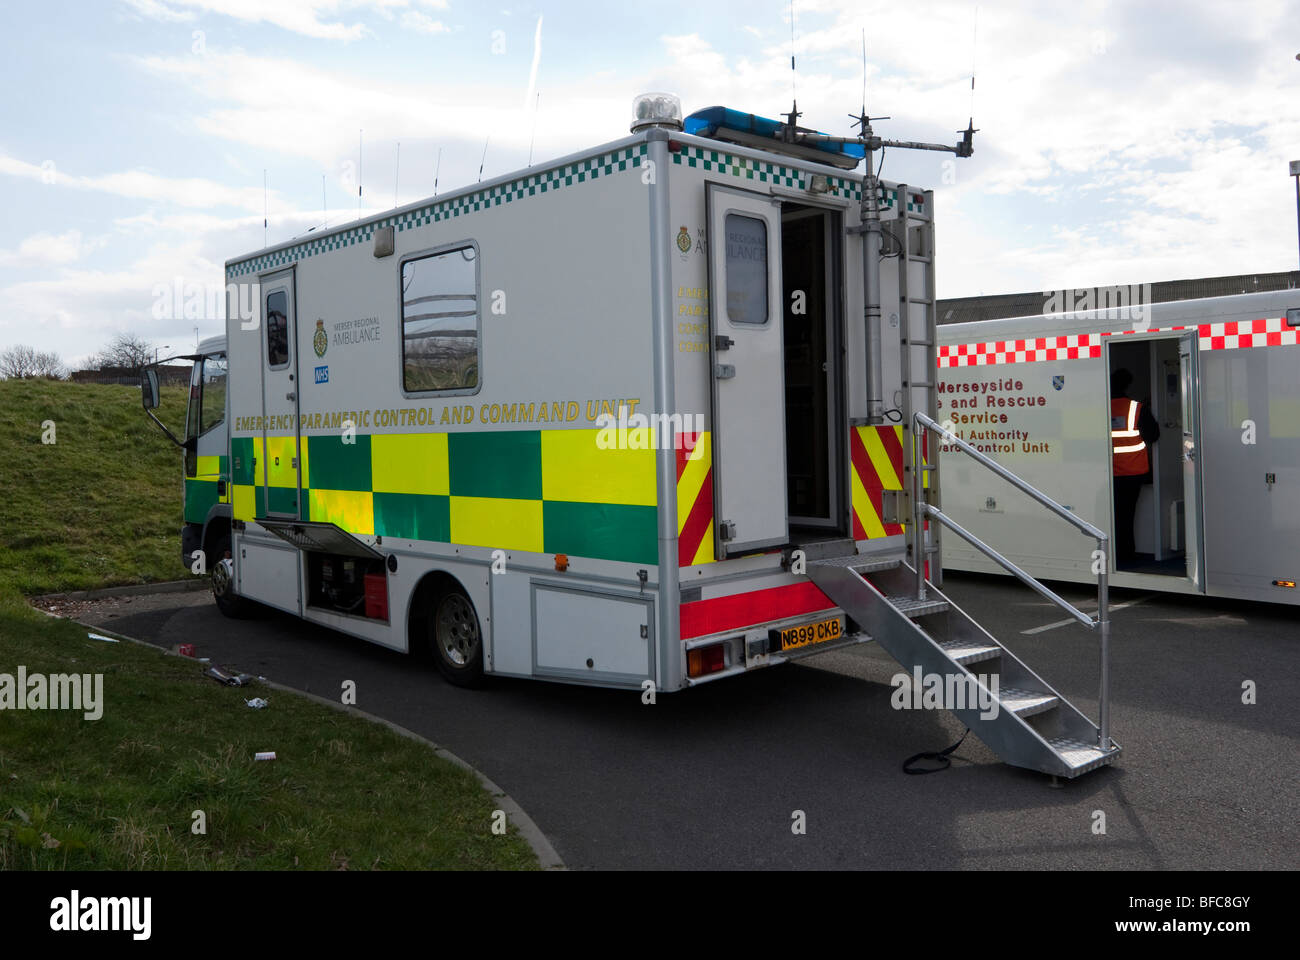 Emergency Paramedic Command and Control Unit Stock Photo